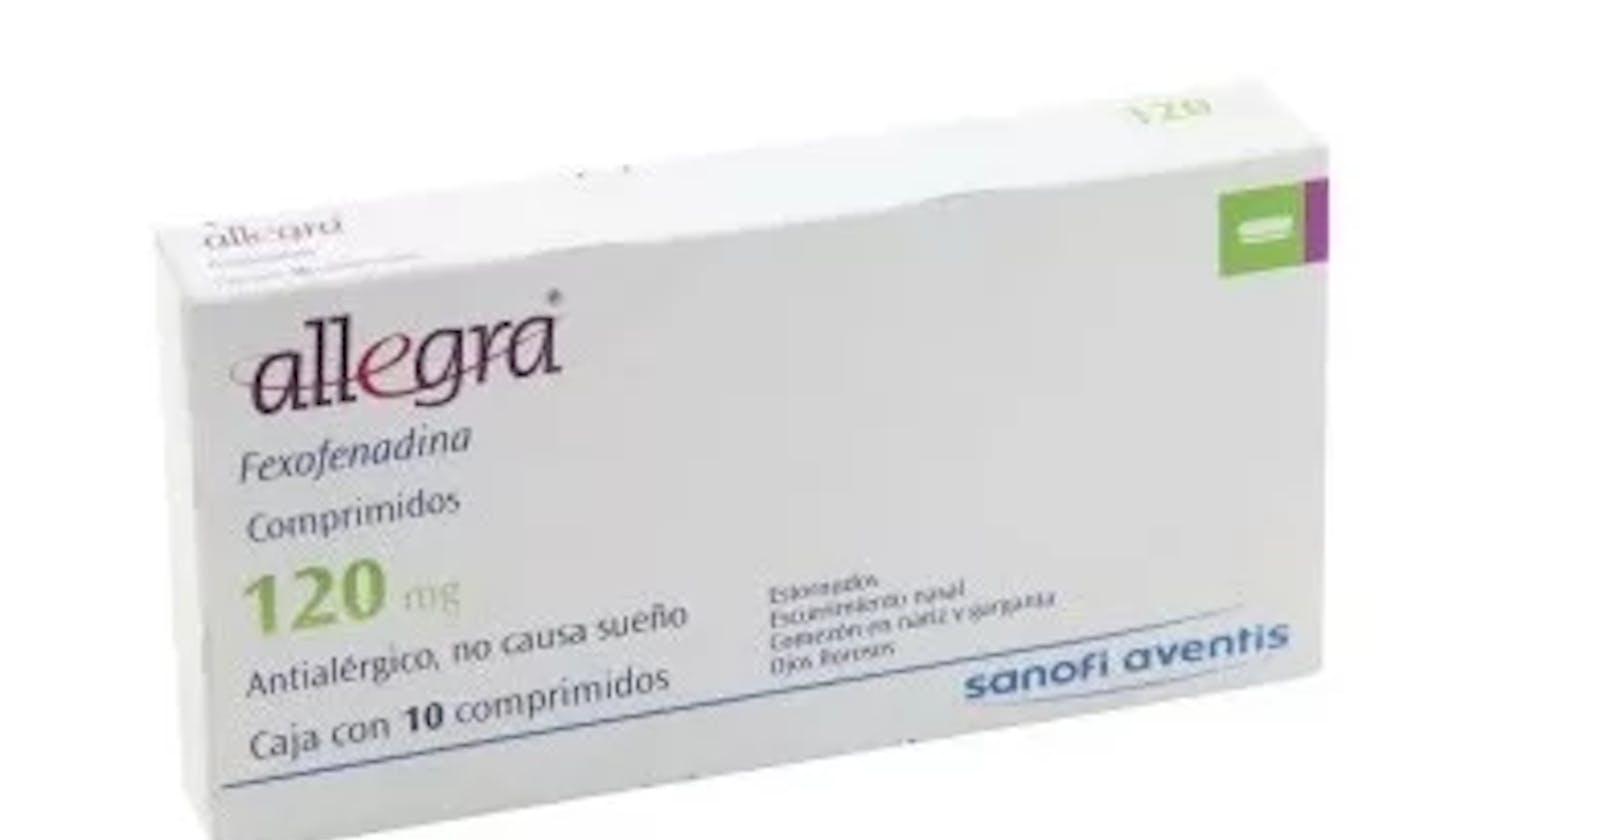 Allegra 120mg: Say Goodbye to Allergies! 🌸